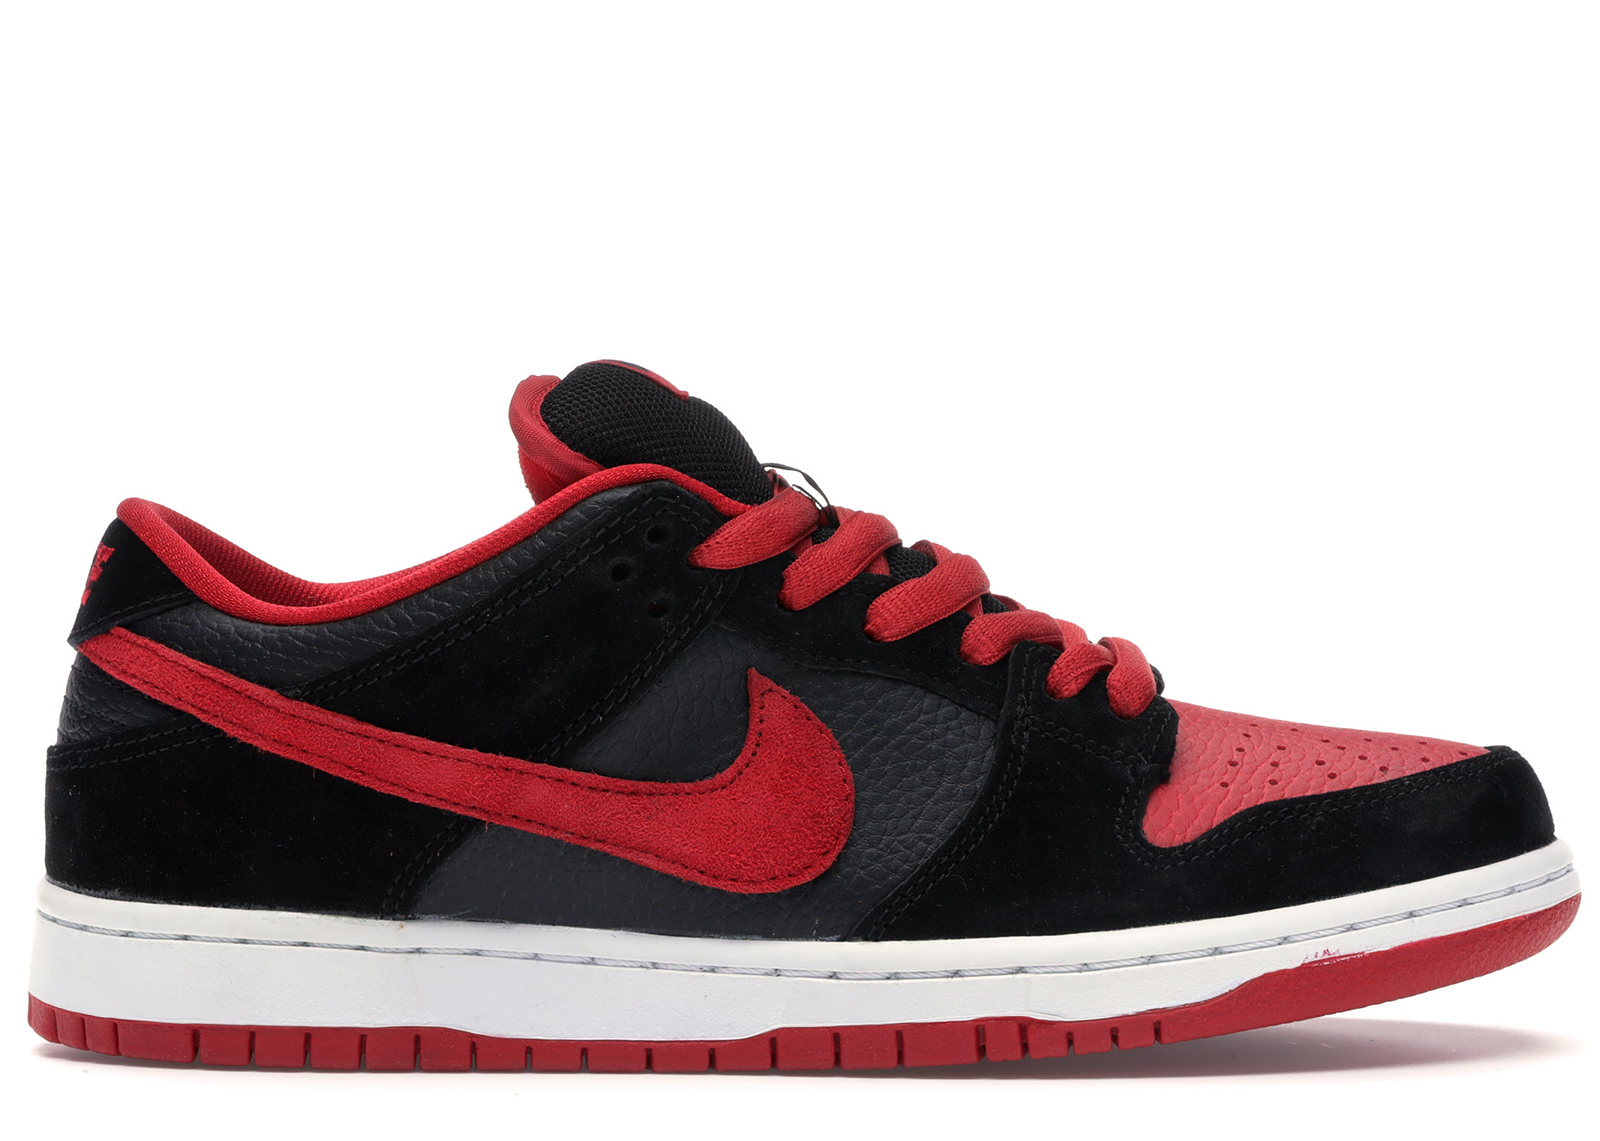 bred dunks low